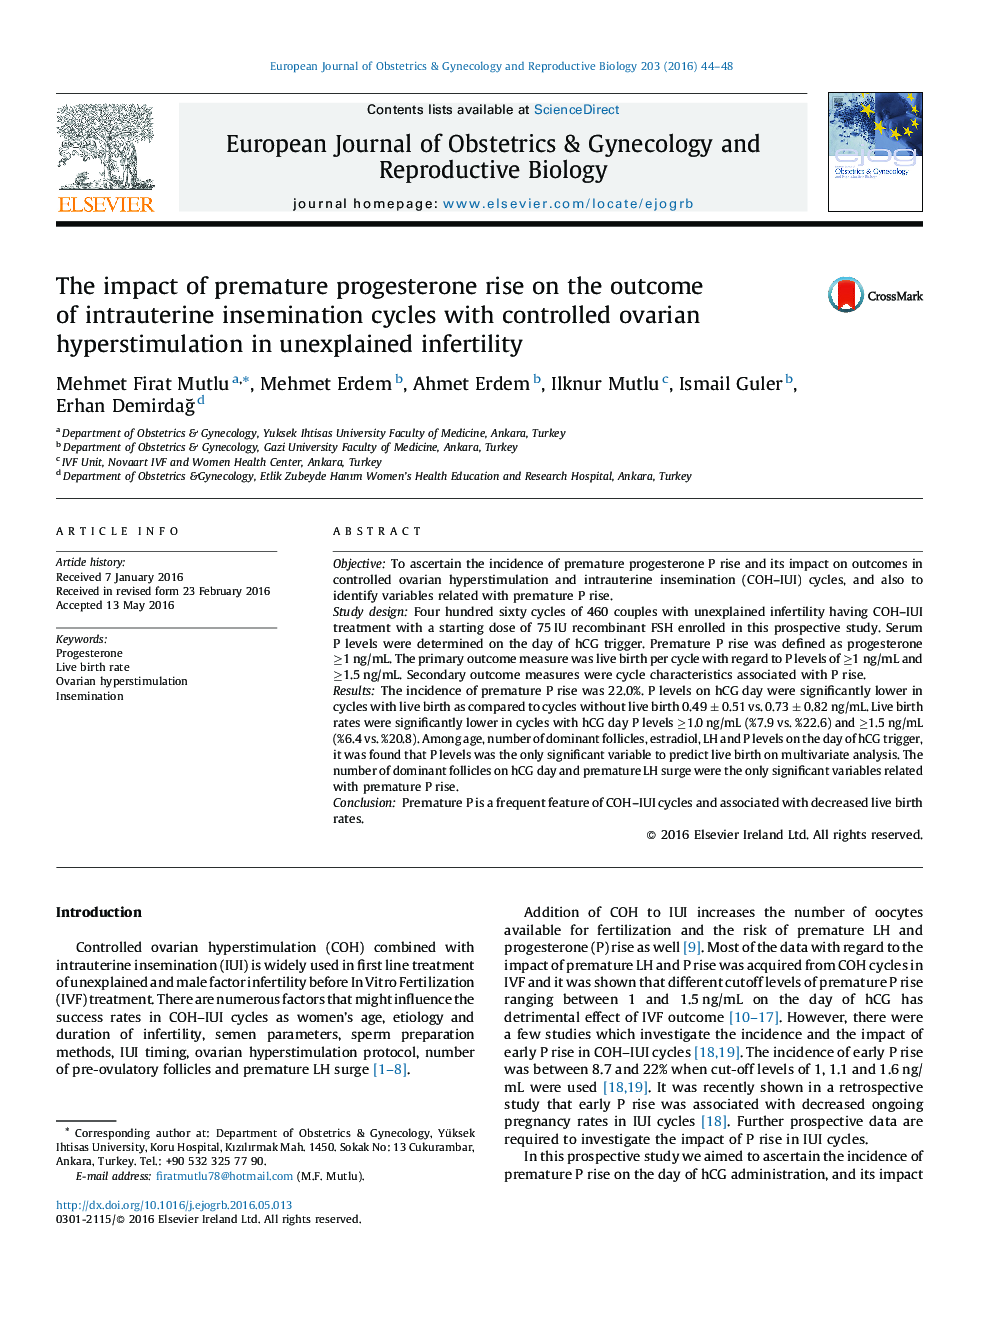 The impact of premature progesterone rise on the outcome of intrauterine insemination cycles with controlled ovarian hyperstimulation in unexplained infertility